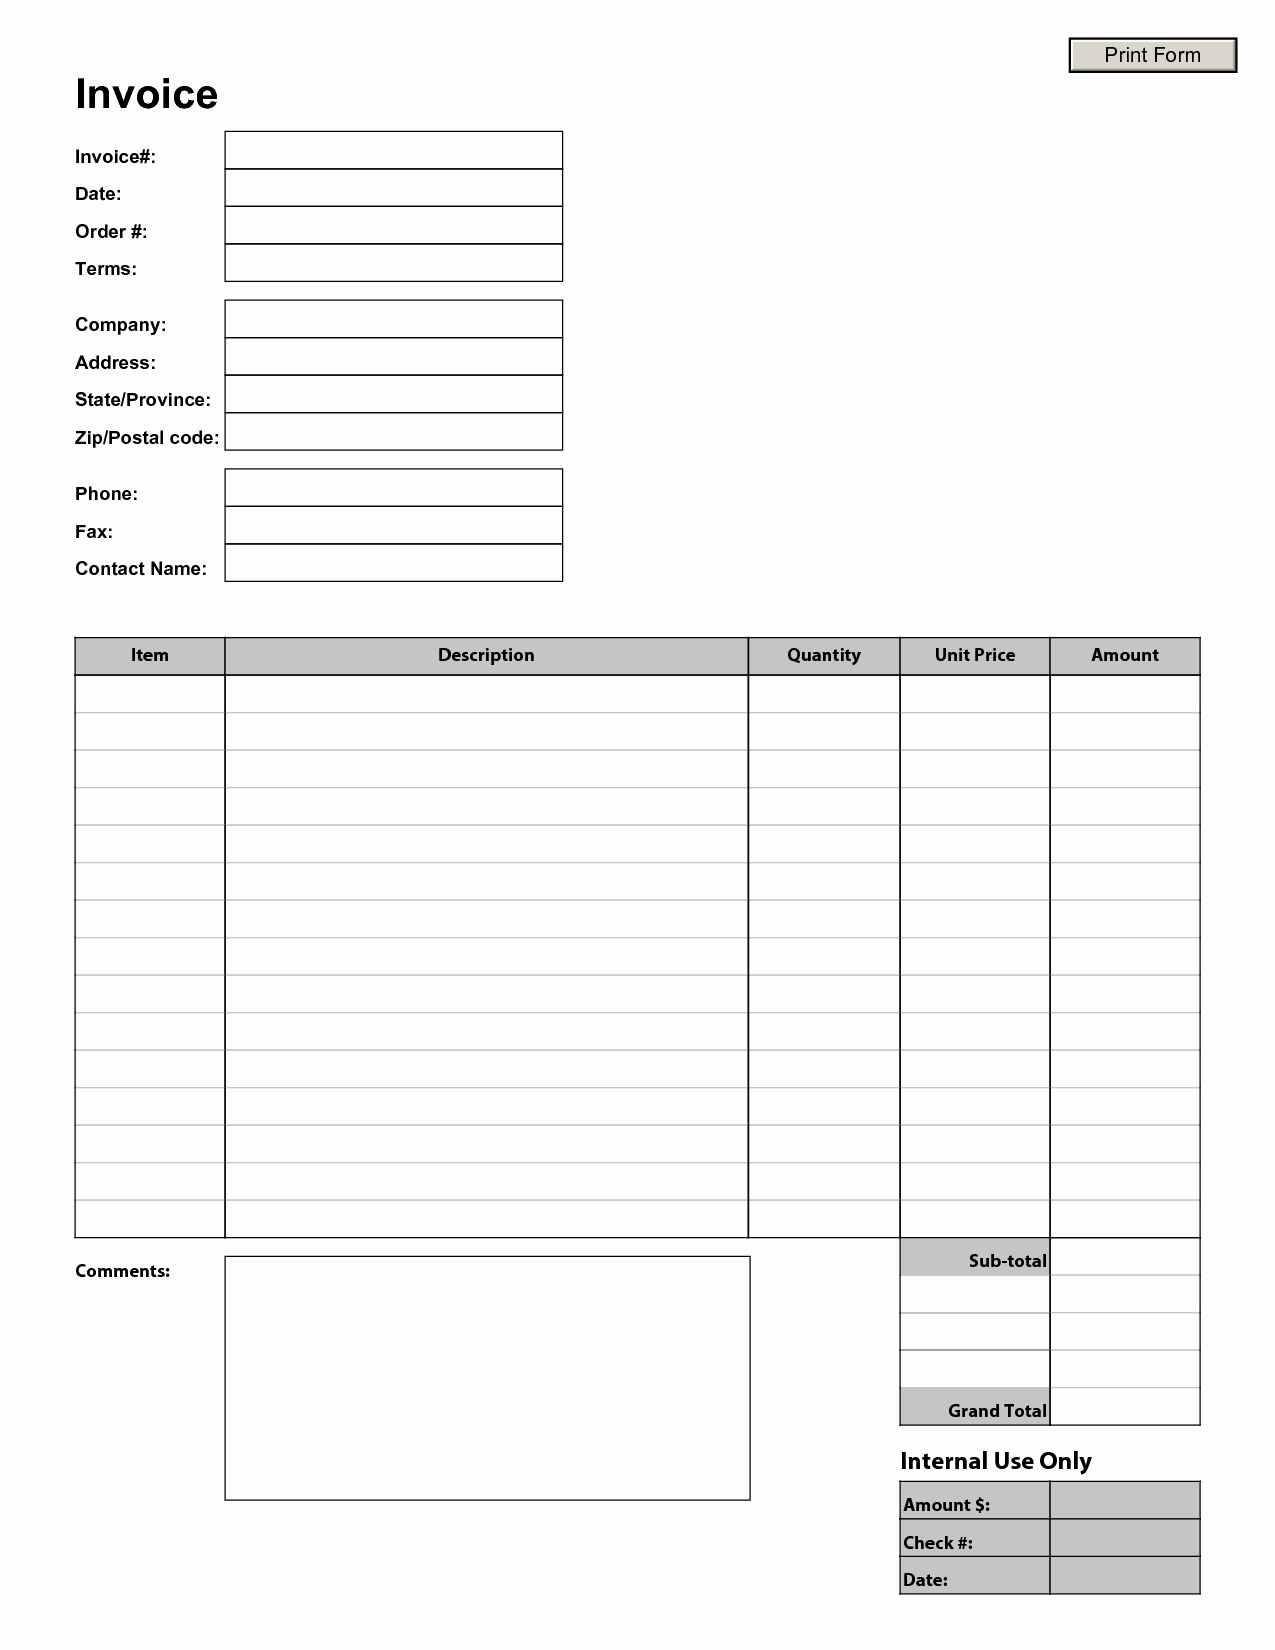 Copy Of A Blank Invoice Awesome Blank Invoice Template Blank Invoice